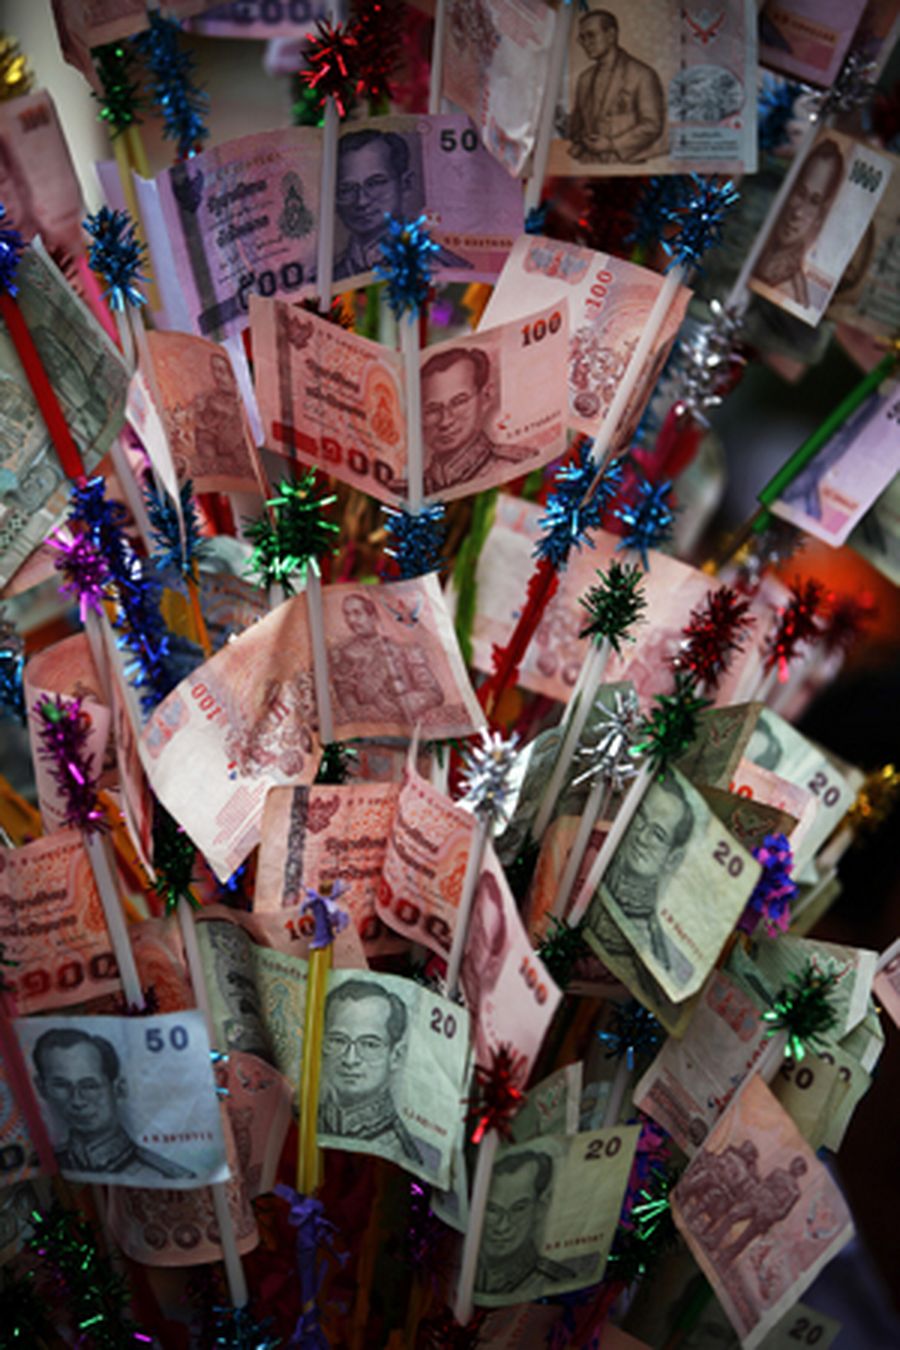 Thai baht banknotes are left by Buddhist believers attending an alms offering ceremony in Bangkok's 